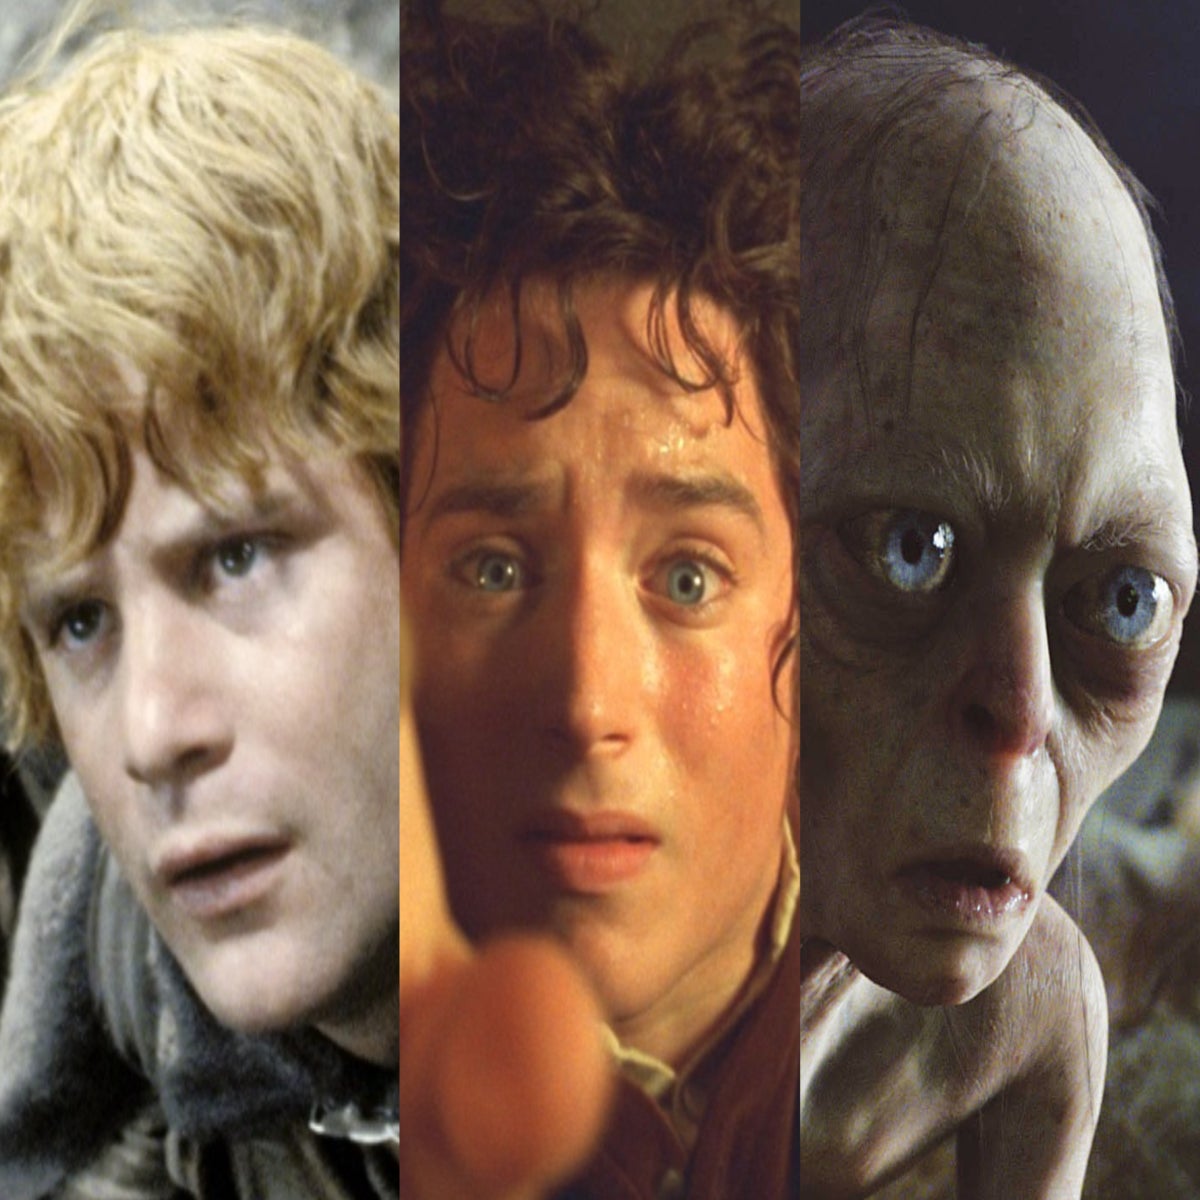 Lord of the Rings: The Rings of Power — Every Major Character